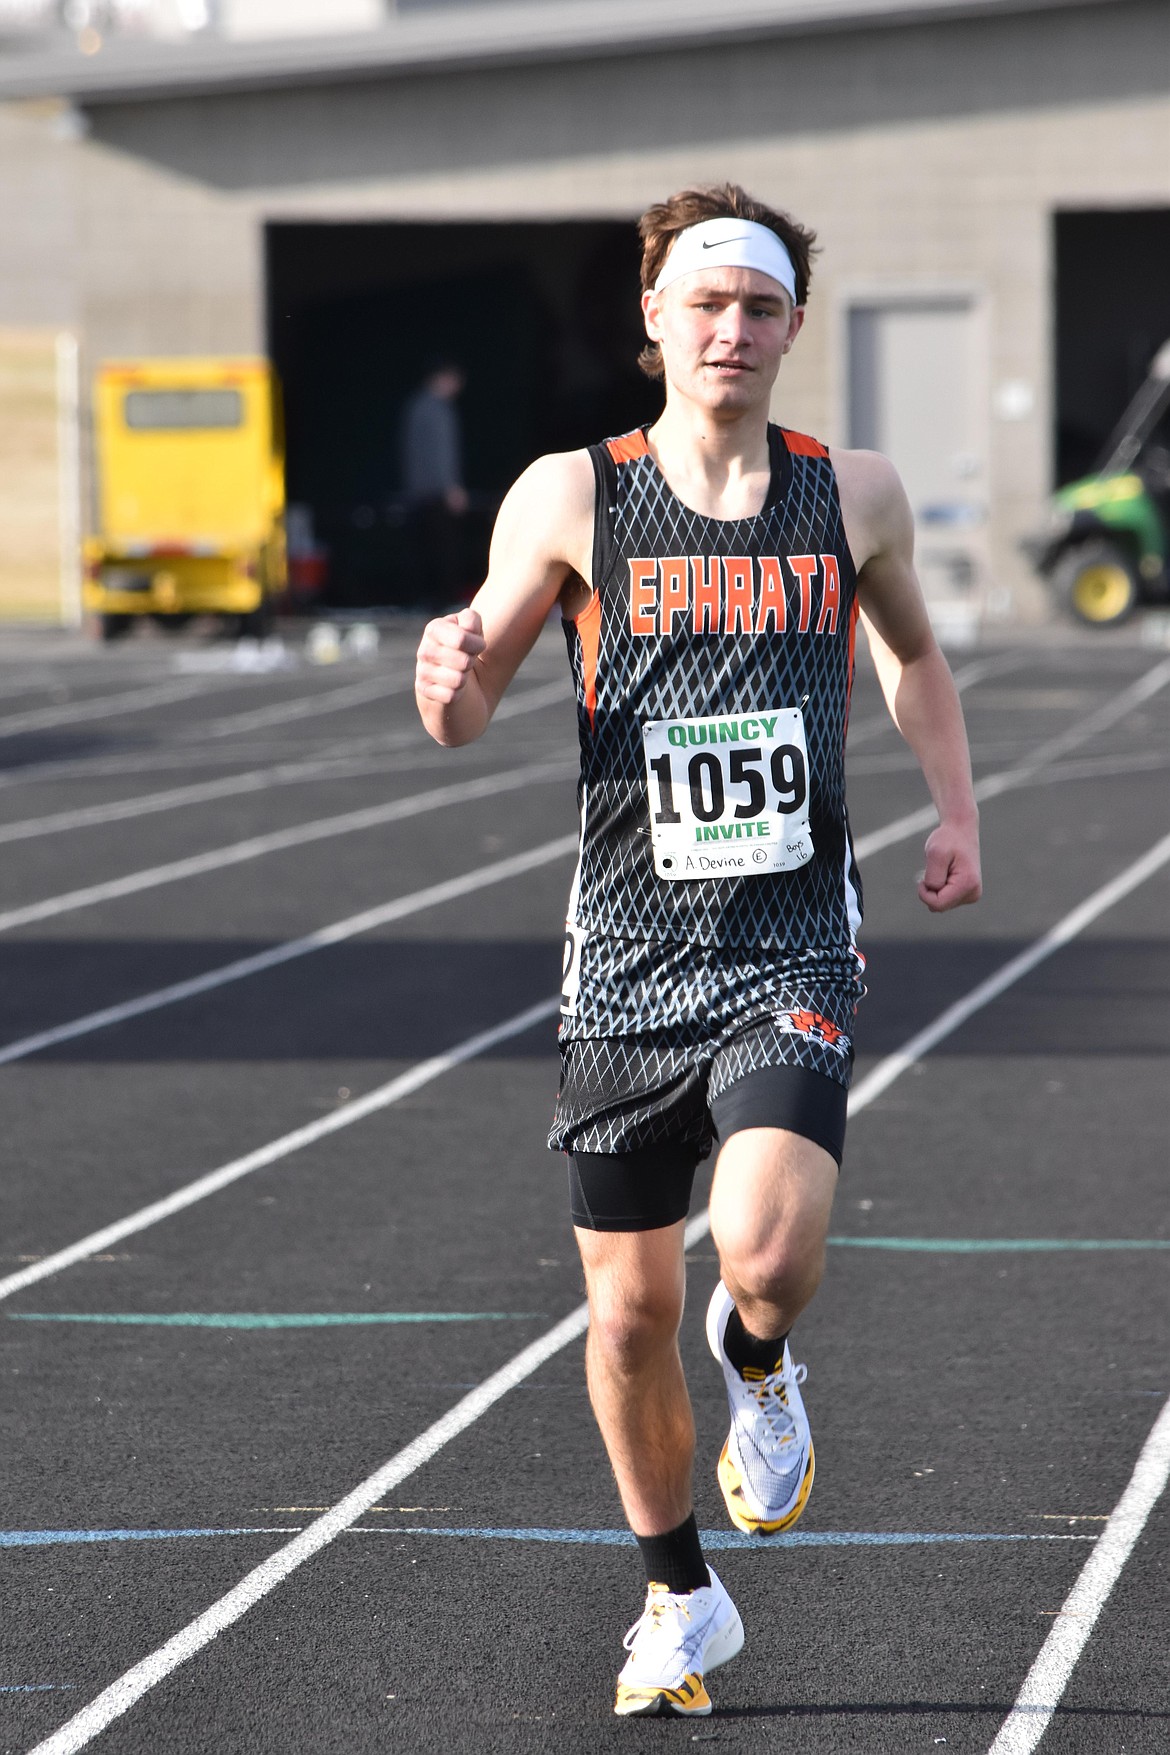 At the Connell Invite, Ephrata’s Aiden Devine placed sixth in the 800-meter run.